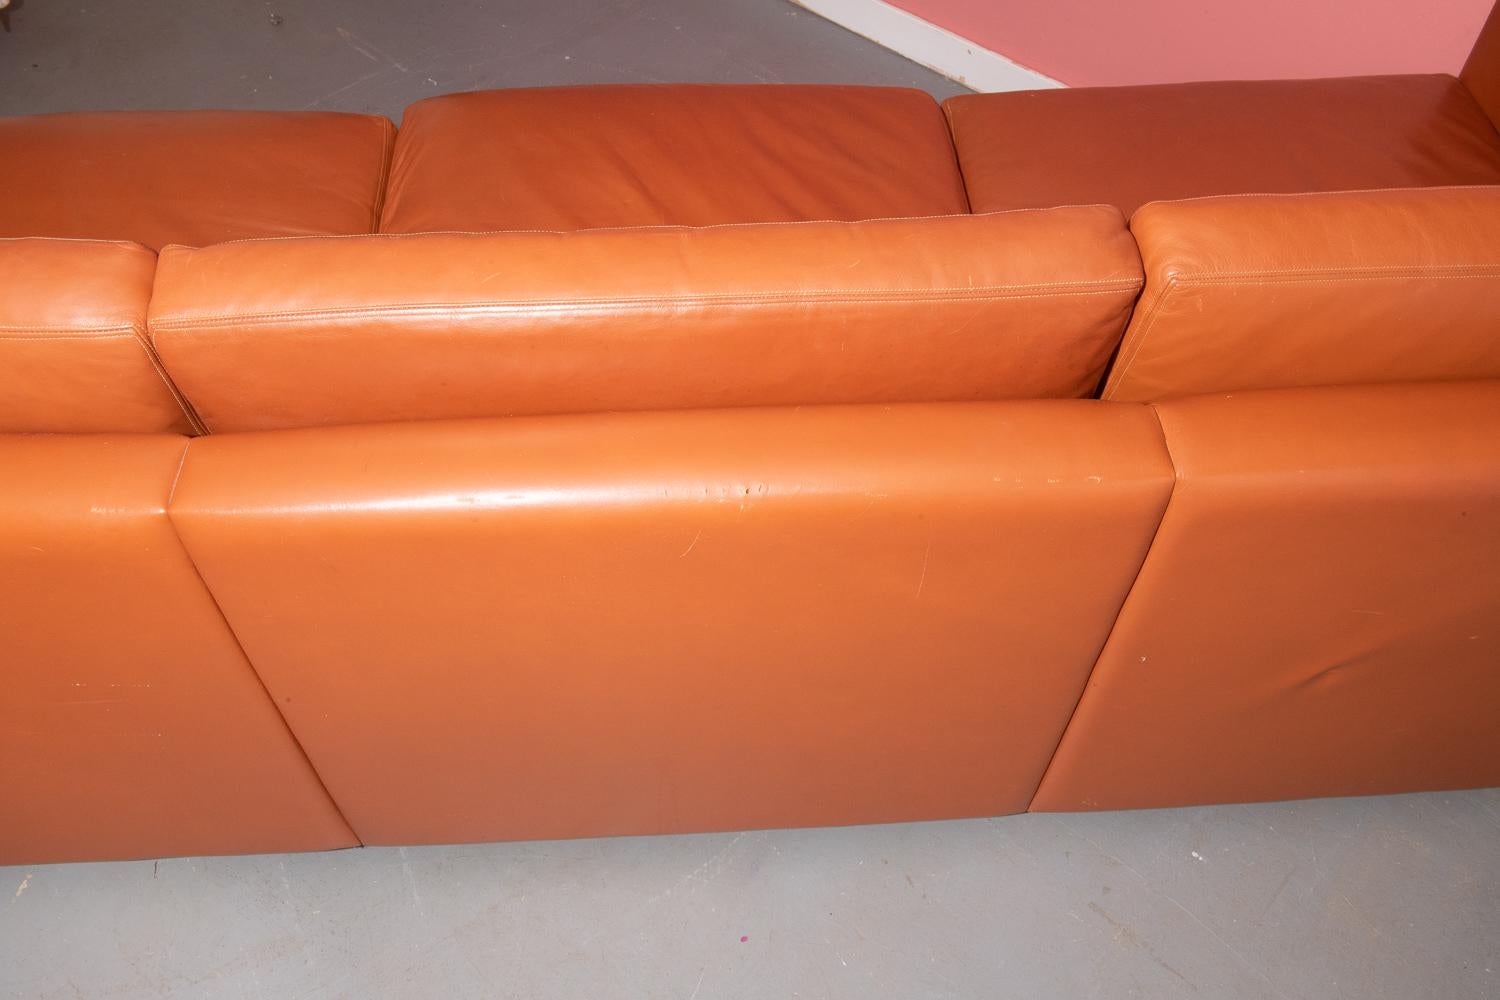 American Knoll Sofa by Charles Pfister 1971 Original Sabrina Leather, #1, '2 Available' For Sale